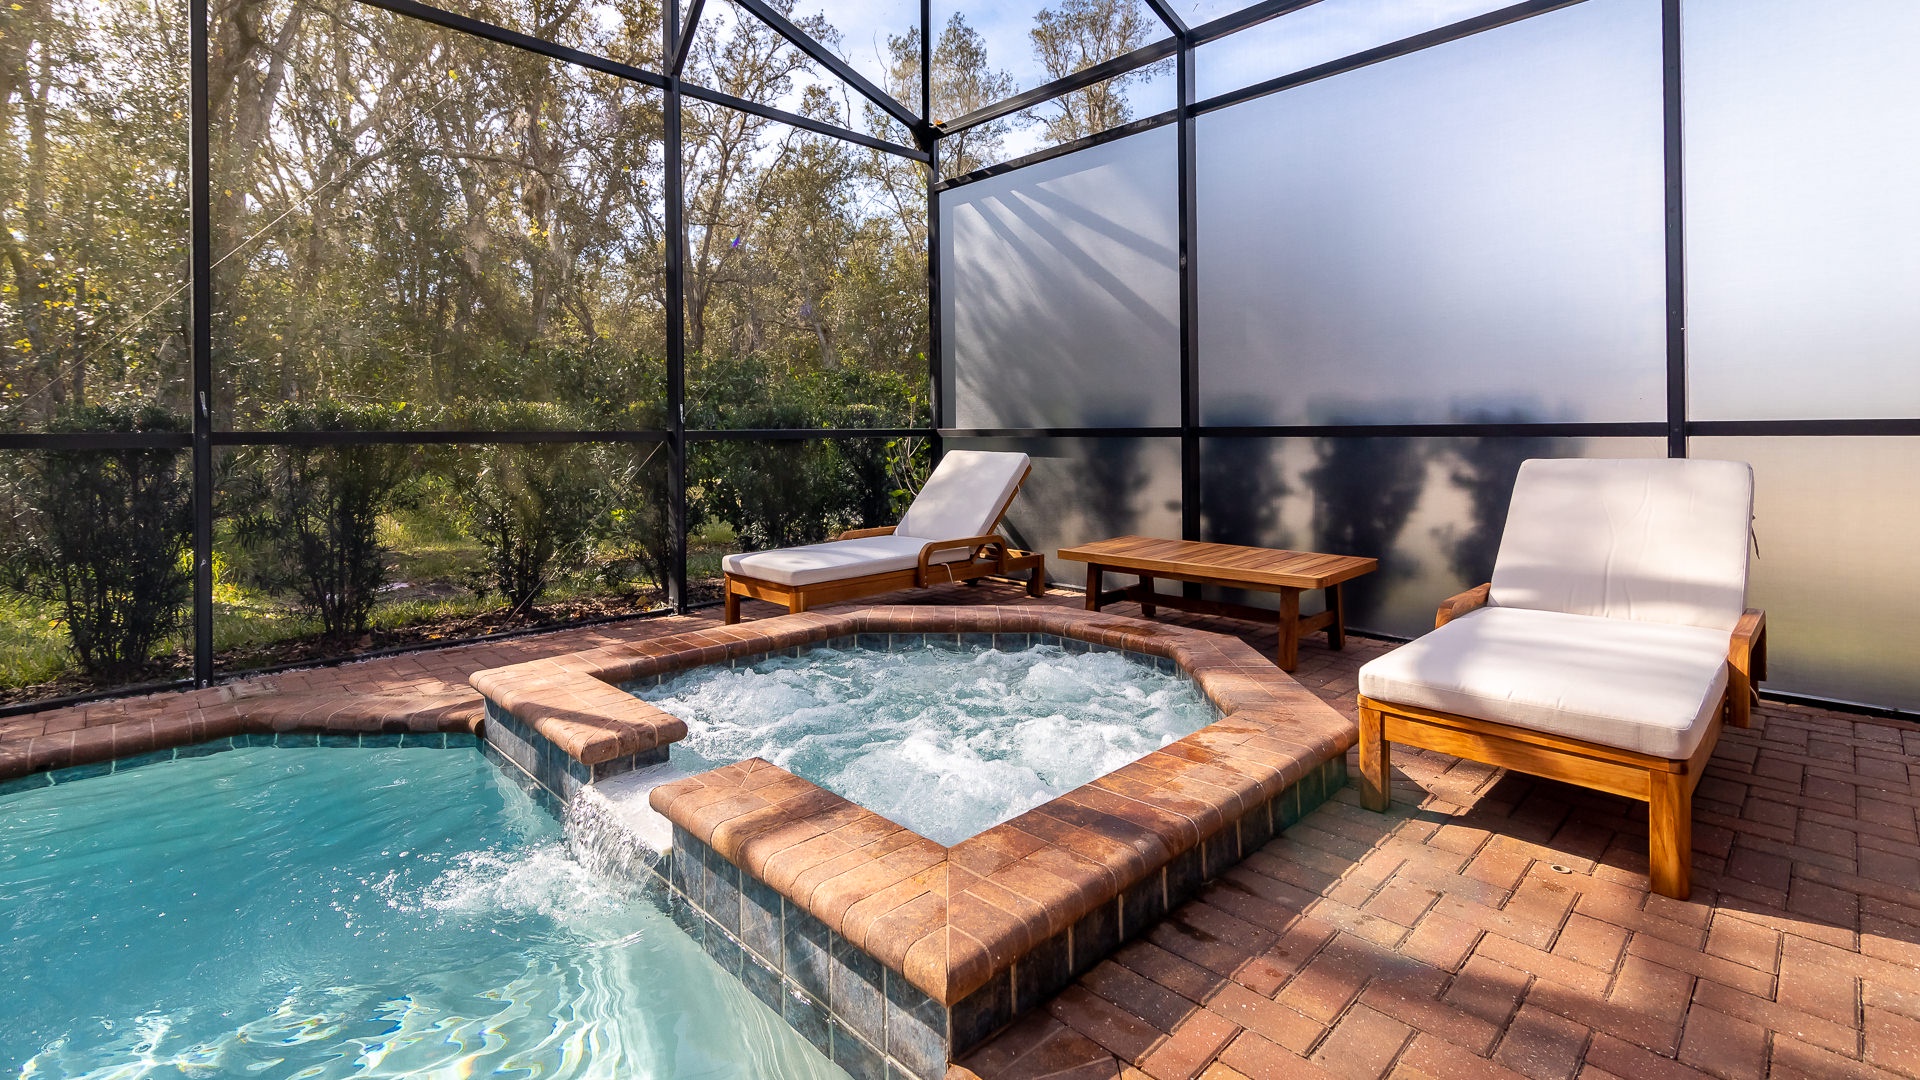 Jacuzzi and pool lounge chairs